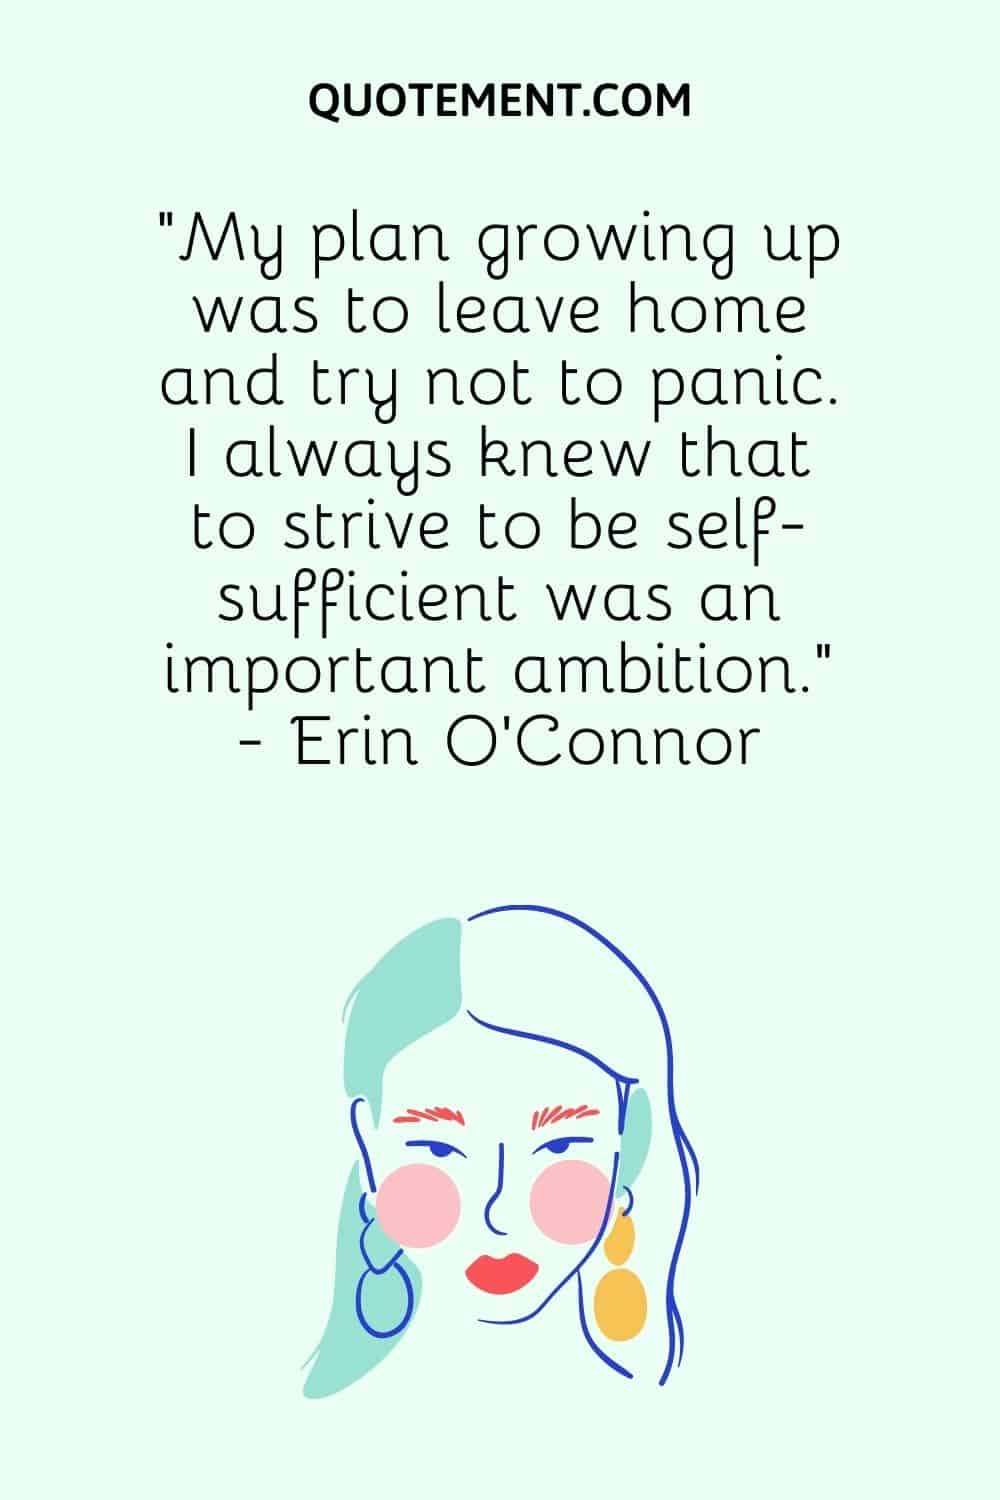 “My plan growing up was to leave home and try not to panic. I always knew that to strive to be self-sufficient was an important ambition.” - Erin O’Connor